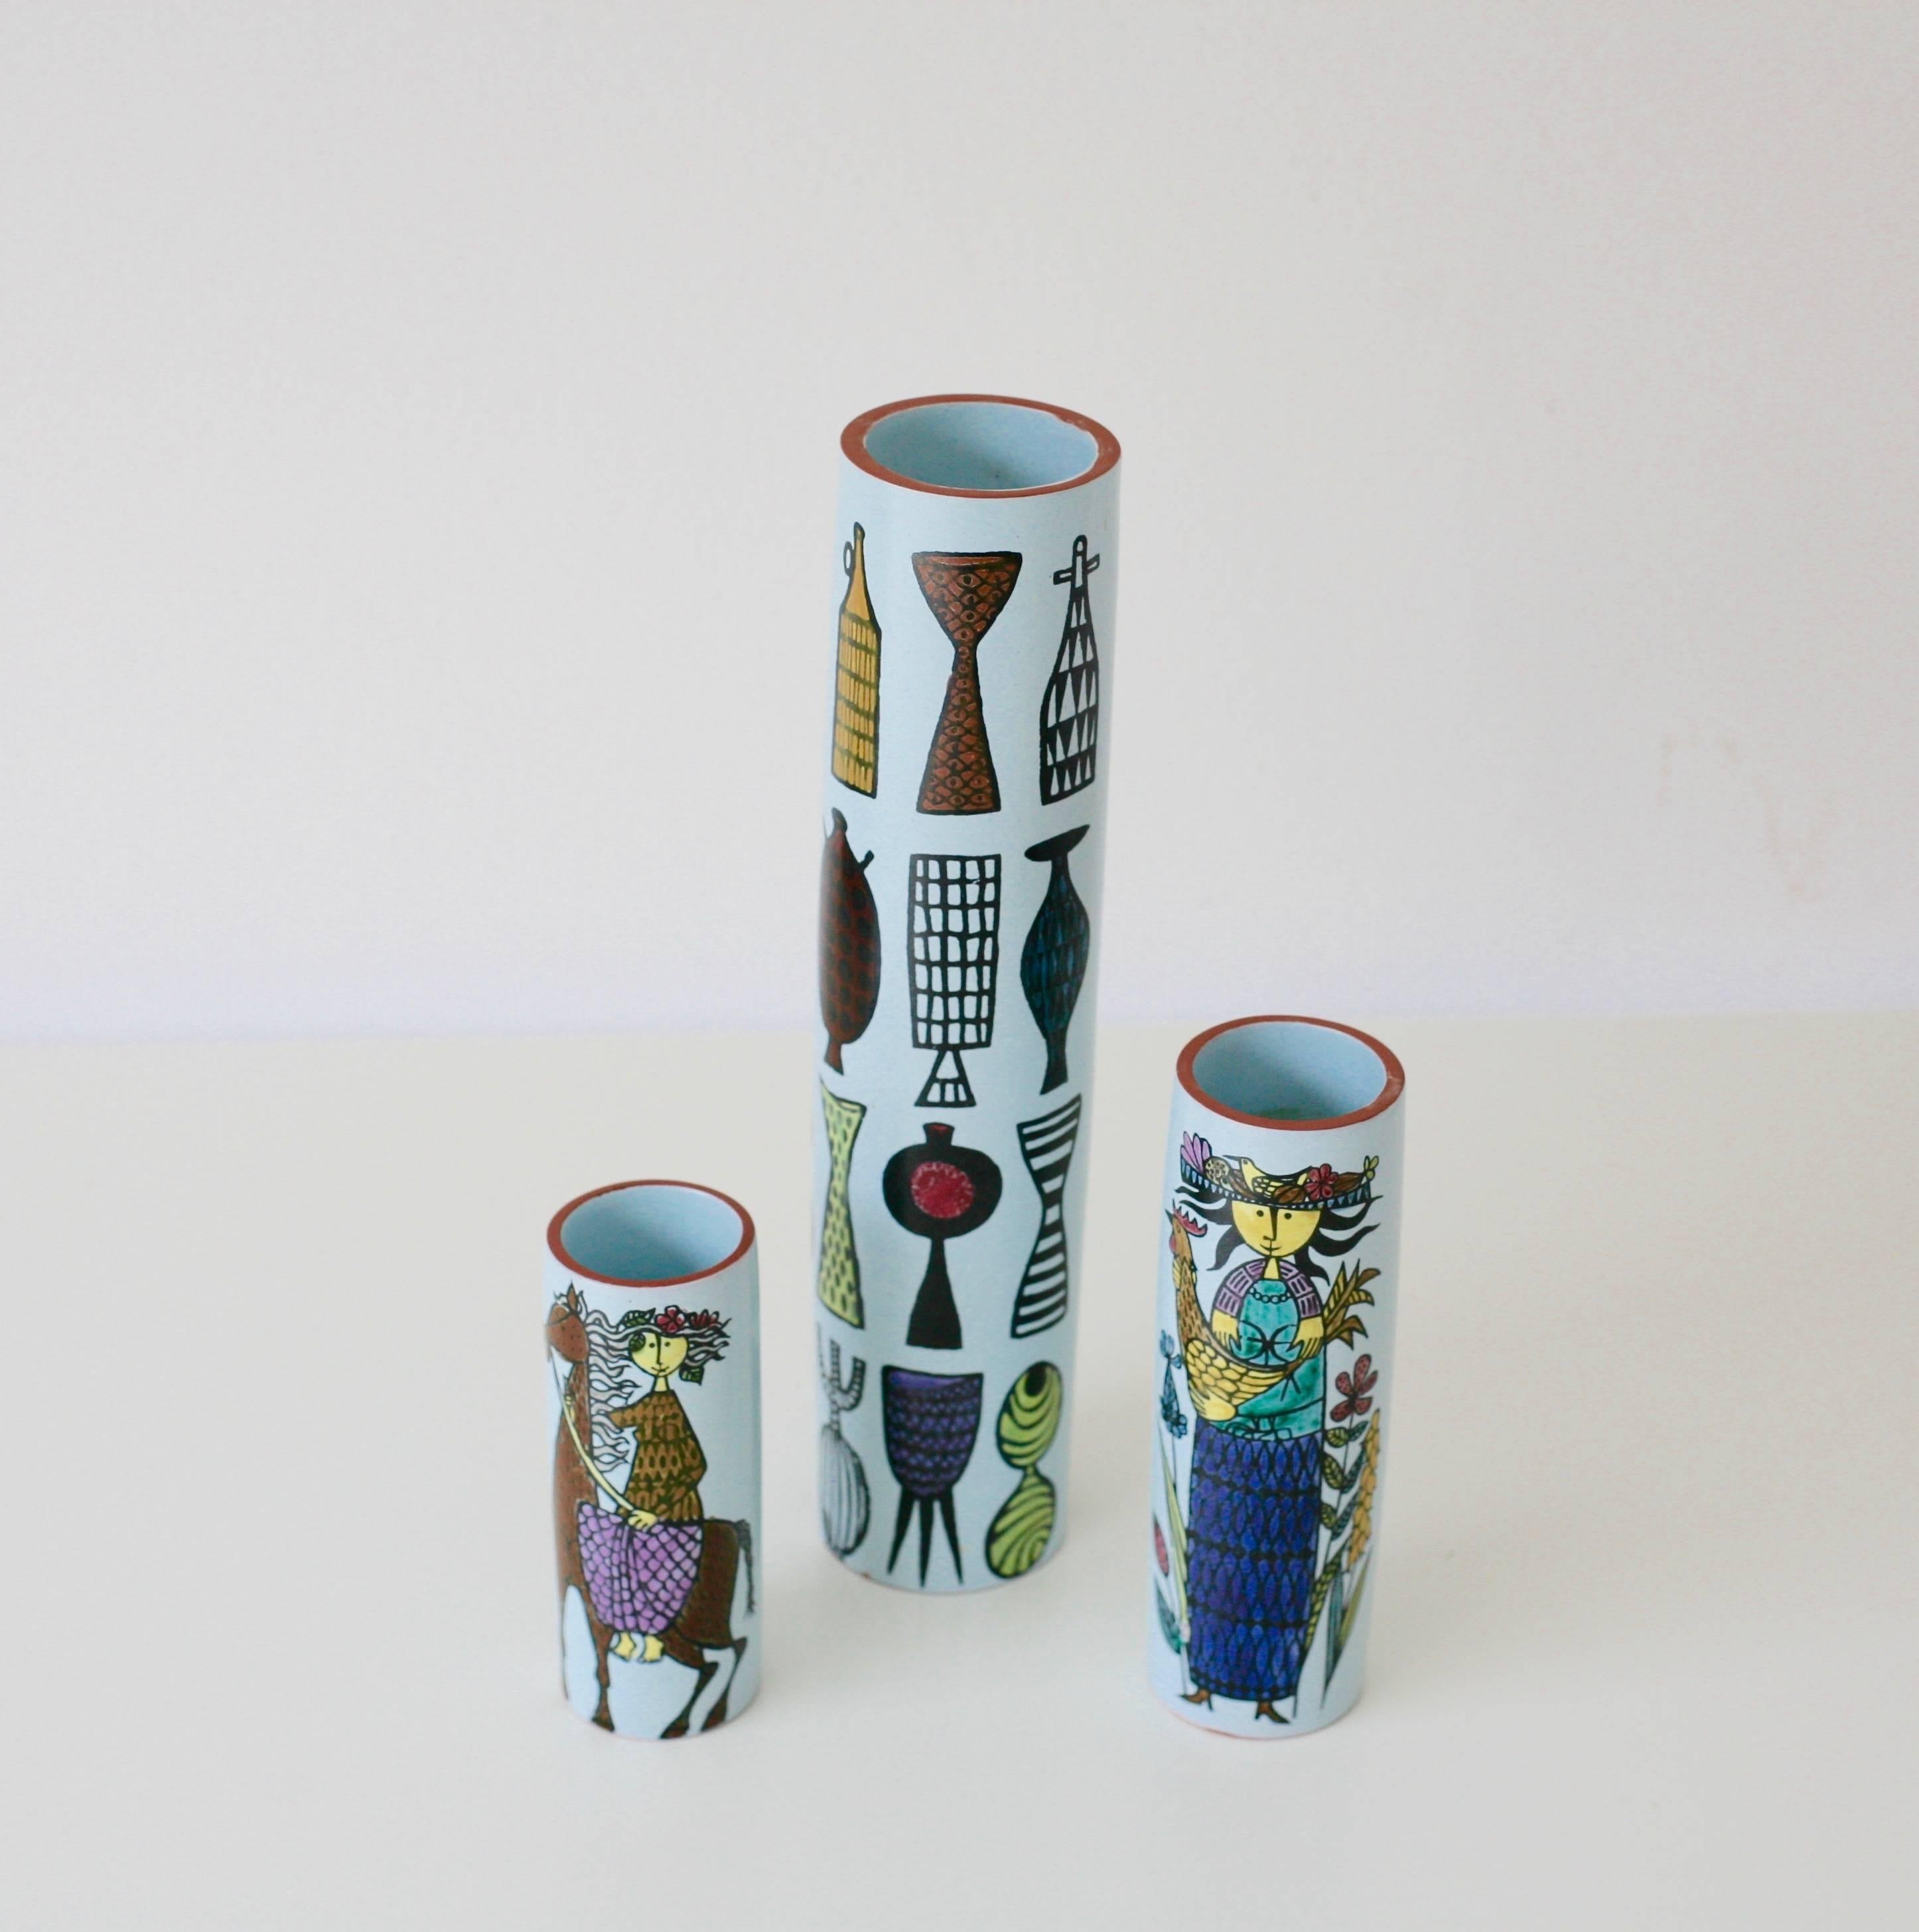 A set of three faience vases in the Karneval series designed by Stig Lindberg for Gustavsberg, Sweden. In production between 1958-1962.